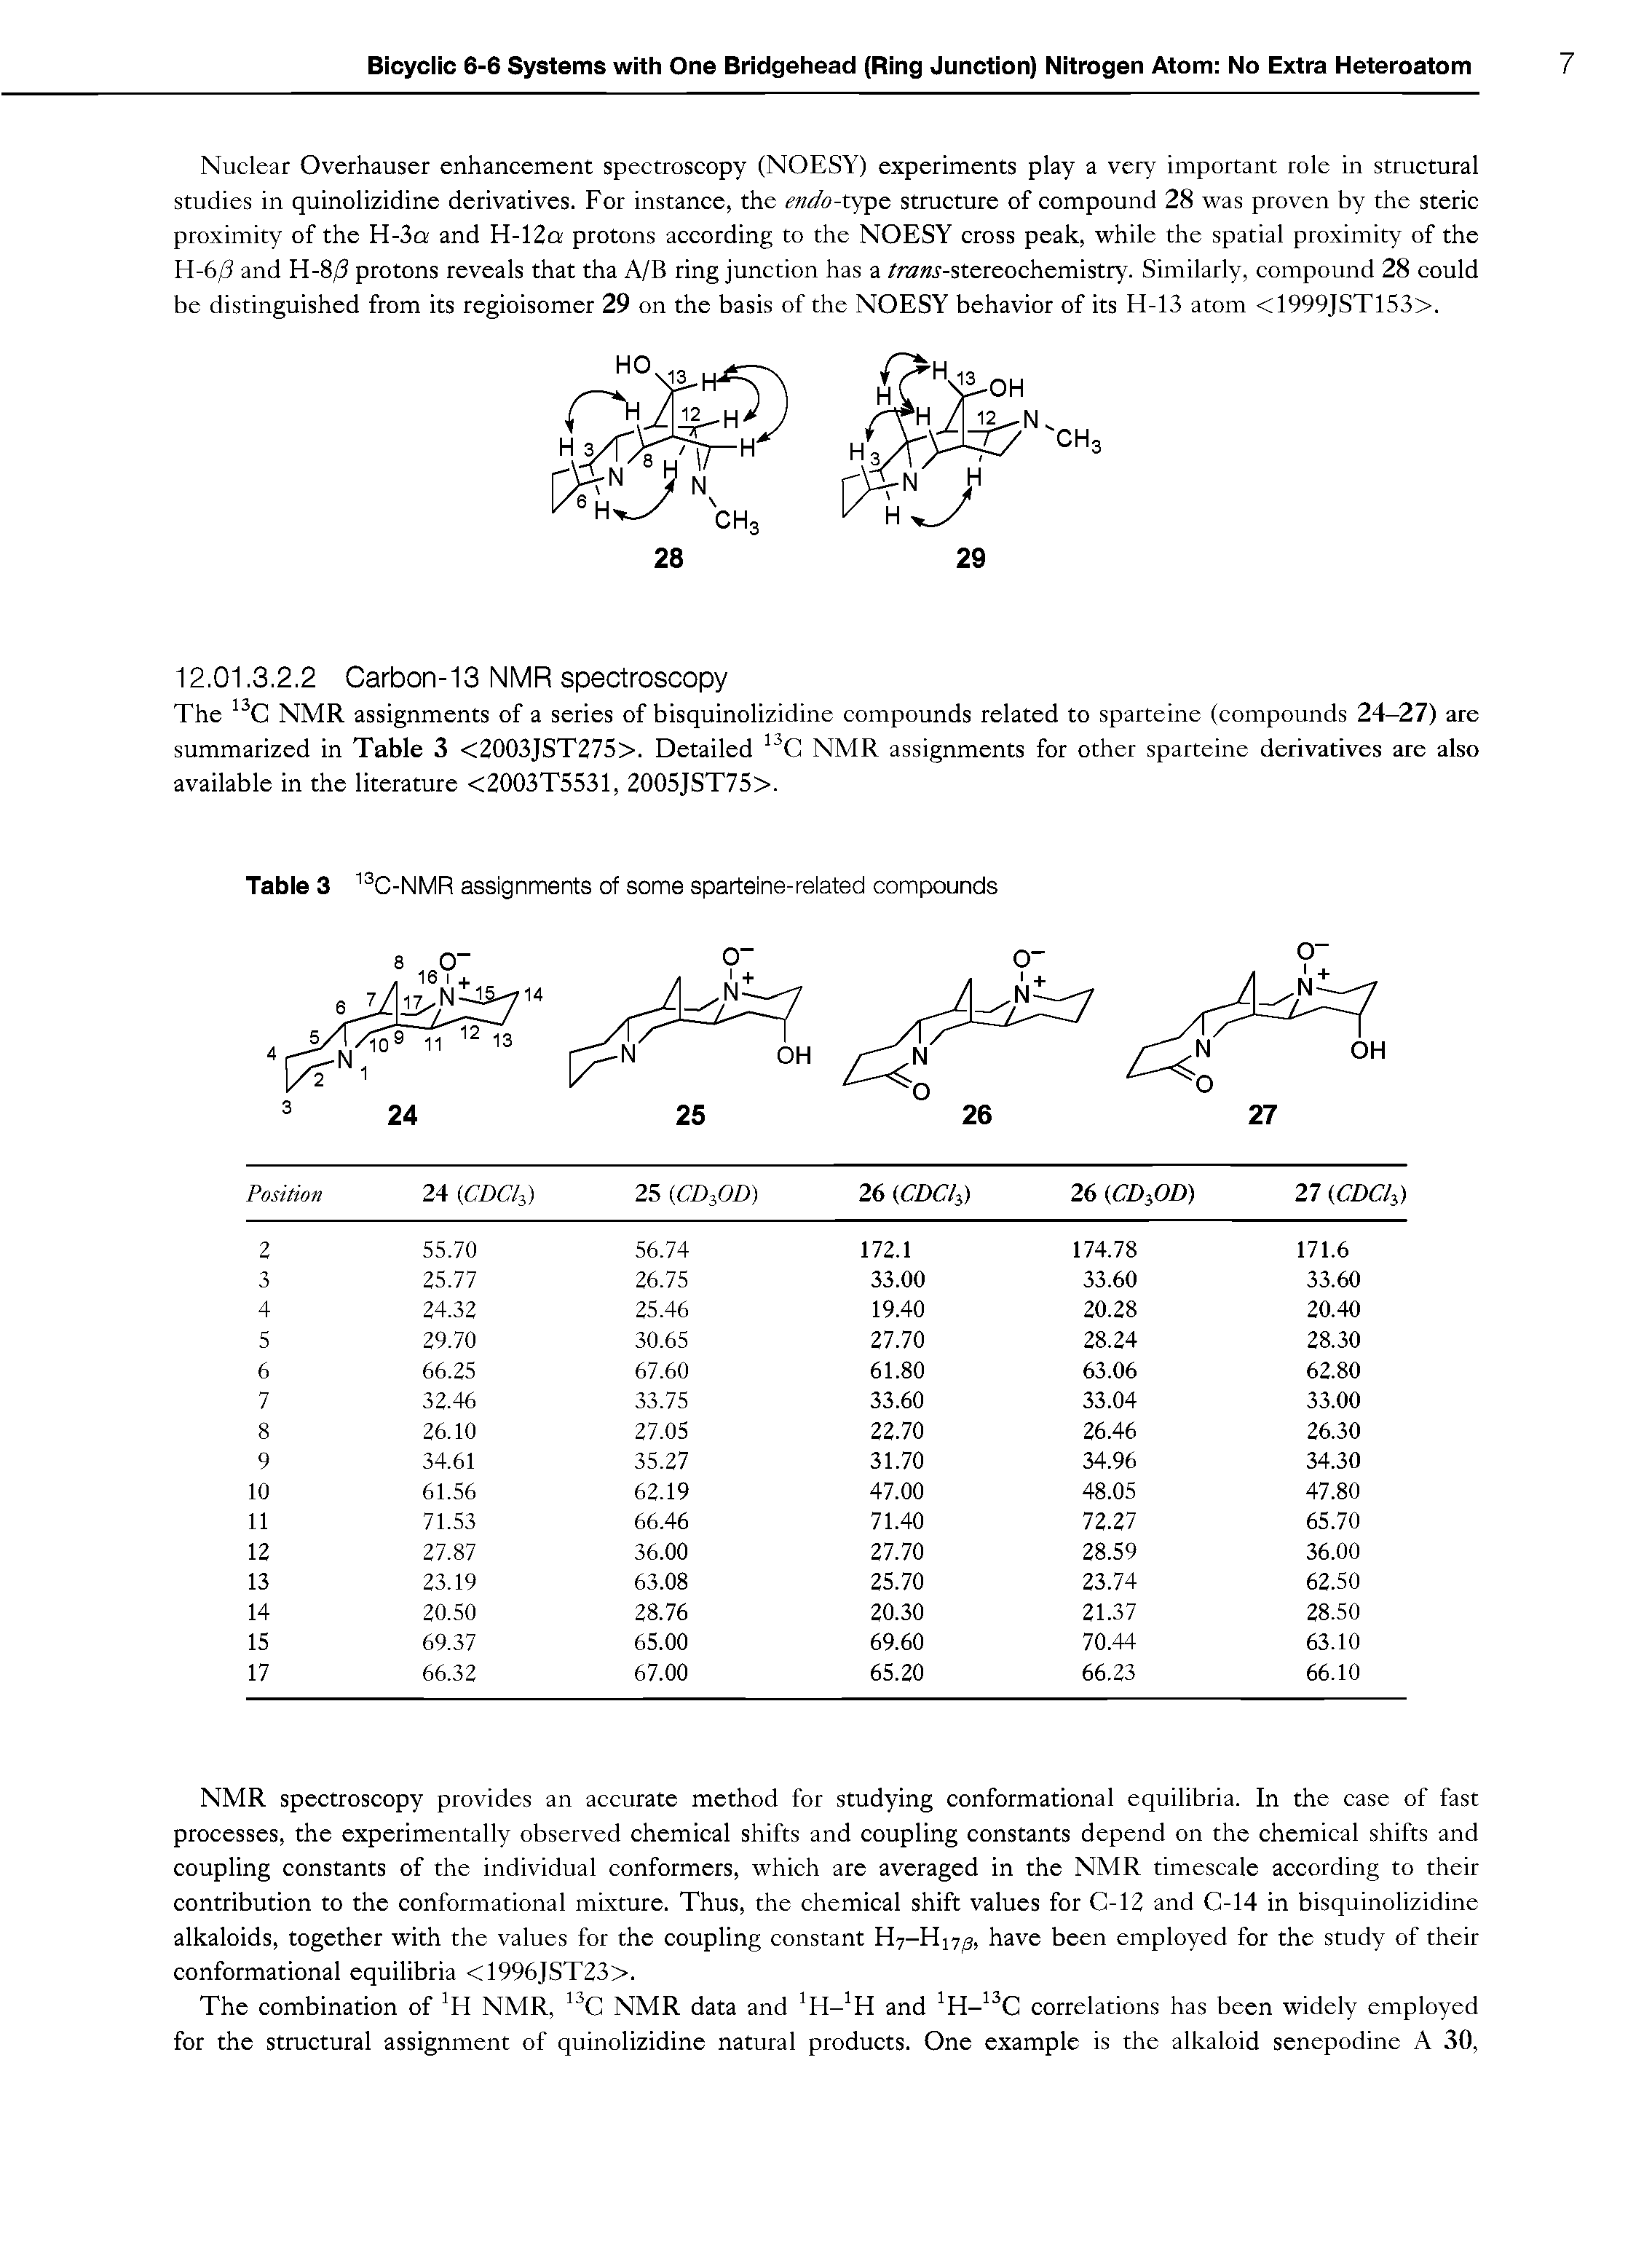 Table 3 13C-NMR assignments of some sparteine-related compounds...